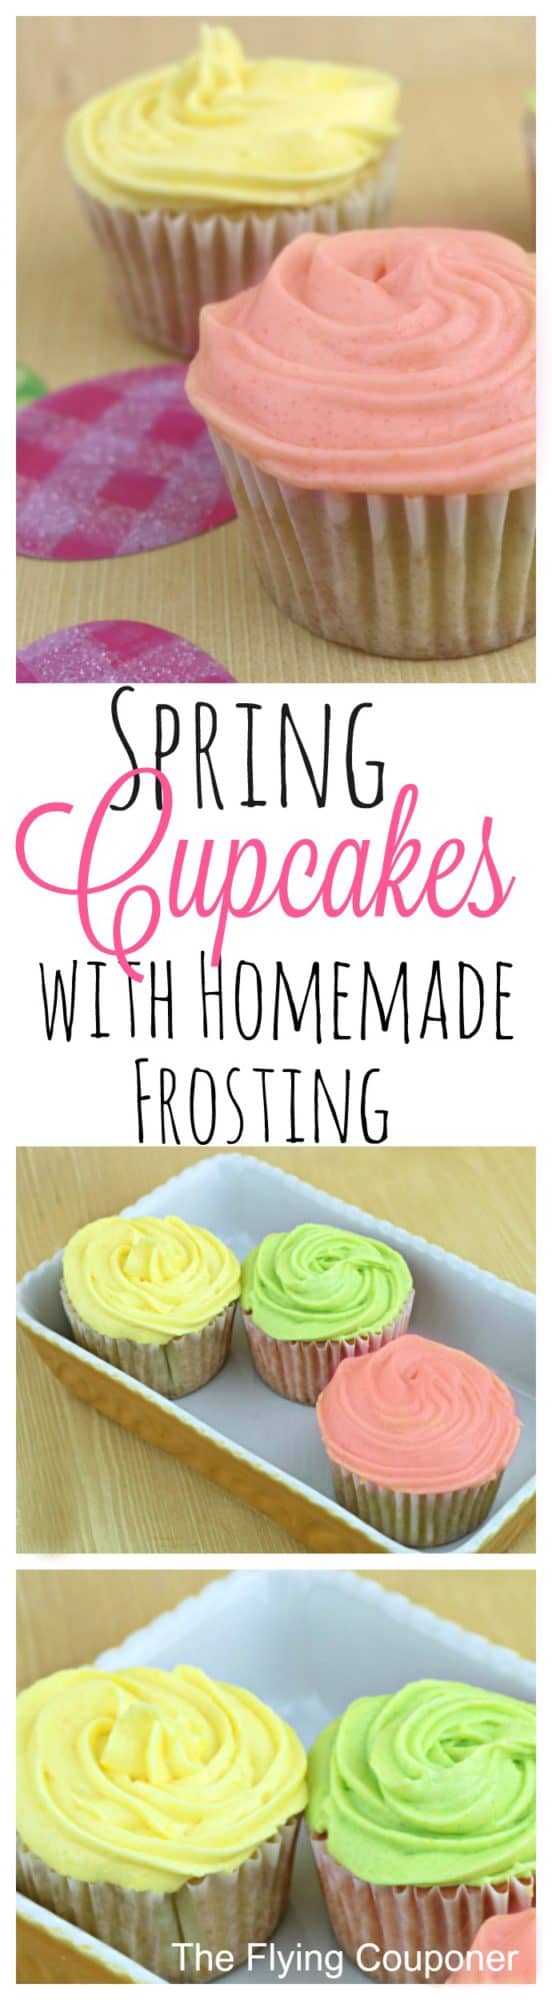 Spring Cupcakes with Homemade Frosting Recipe. Cupcakes and Easter. The Flying Couponer.